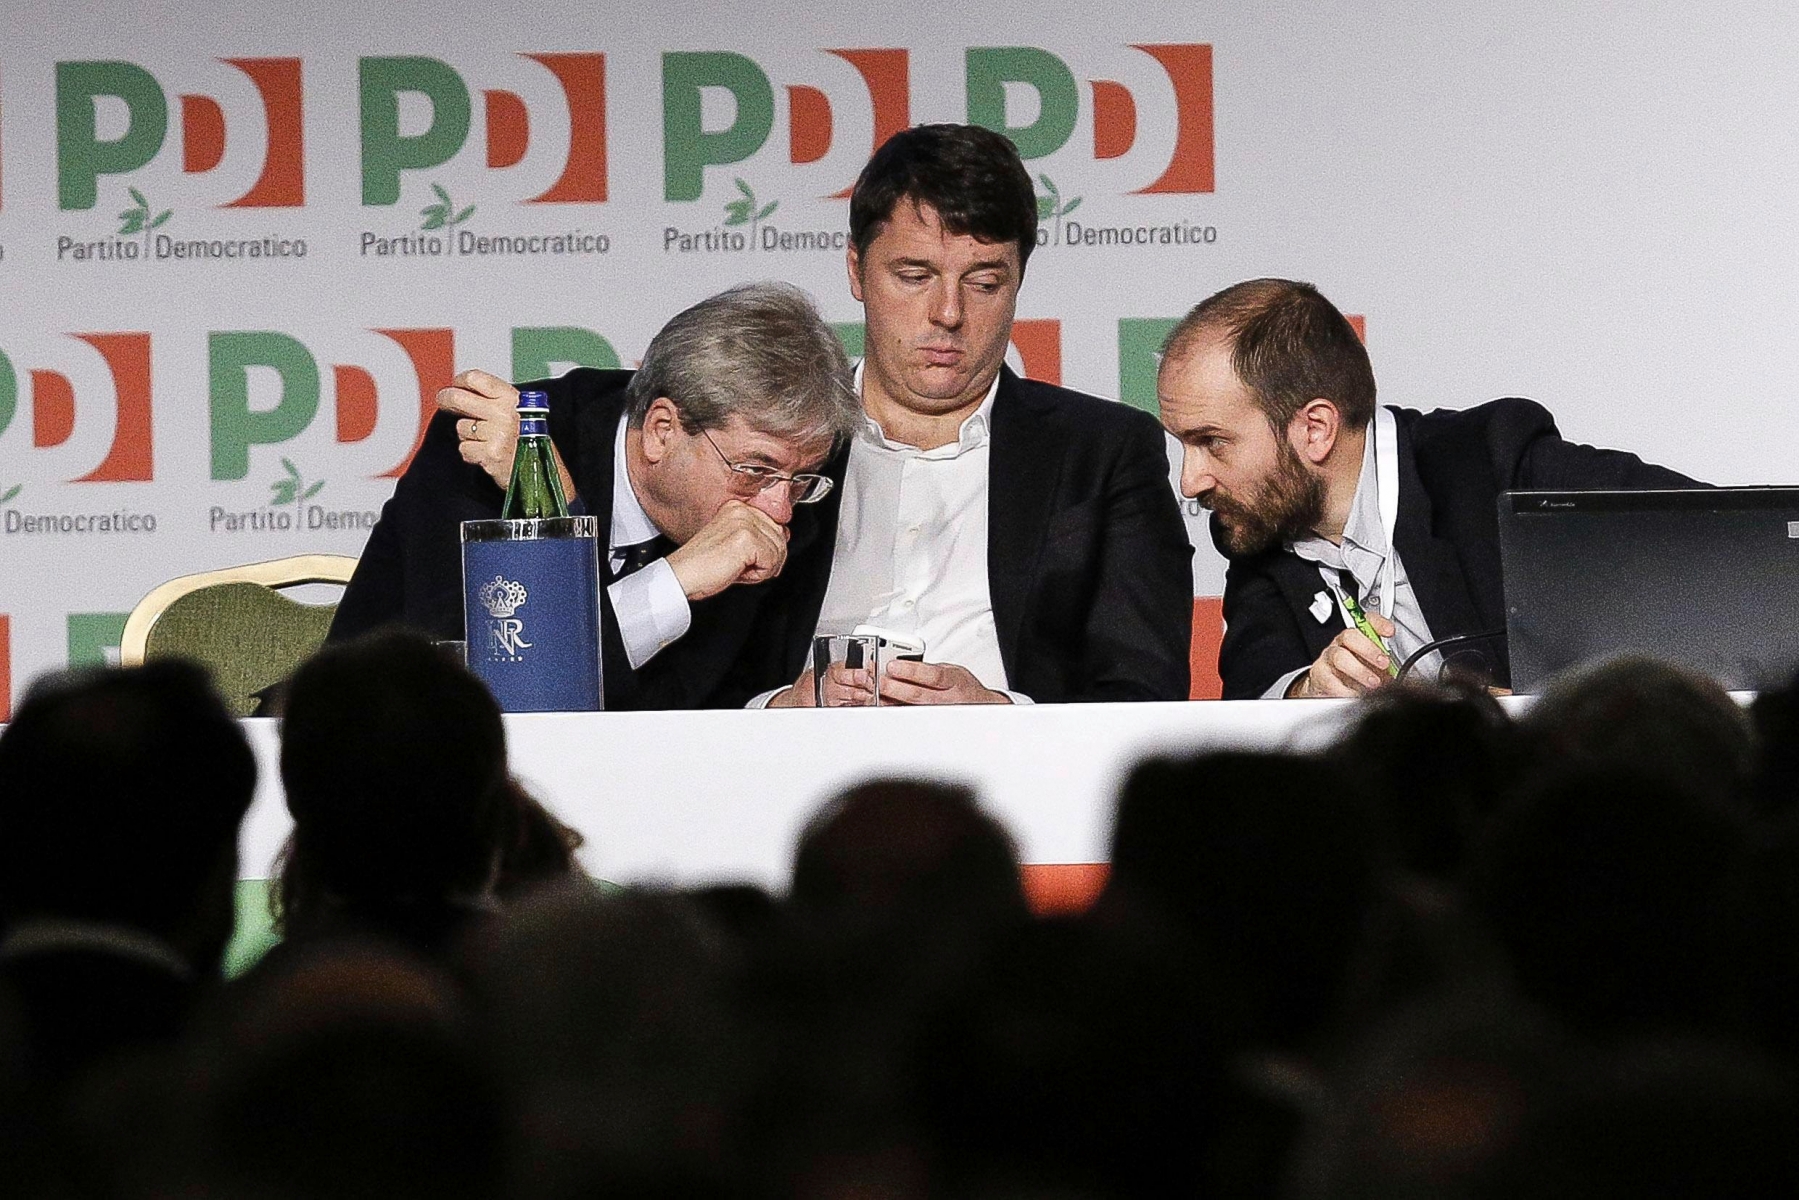 epa05803660 Italian Premier Paolo Gentiloni (L), former Italian Premier Matteo Renzi (C) and President of the Democratic Party Matteo Orfini (R) in discussions at the PD (Democratic Party) assembly at 'Hotel Parco dei Principi in Rome, Italy, 19 February 2017. The PD (Democratic Party) met to discuss the future of the PD party.  EPA/GIUSEPPE LAMI ITALY PARTIES